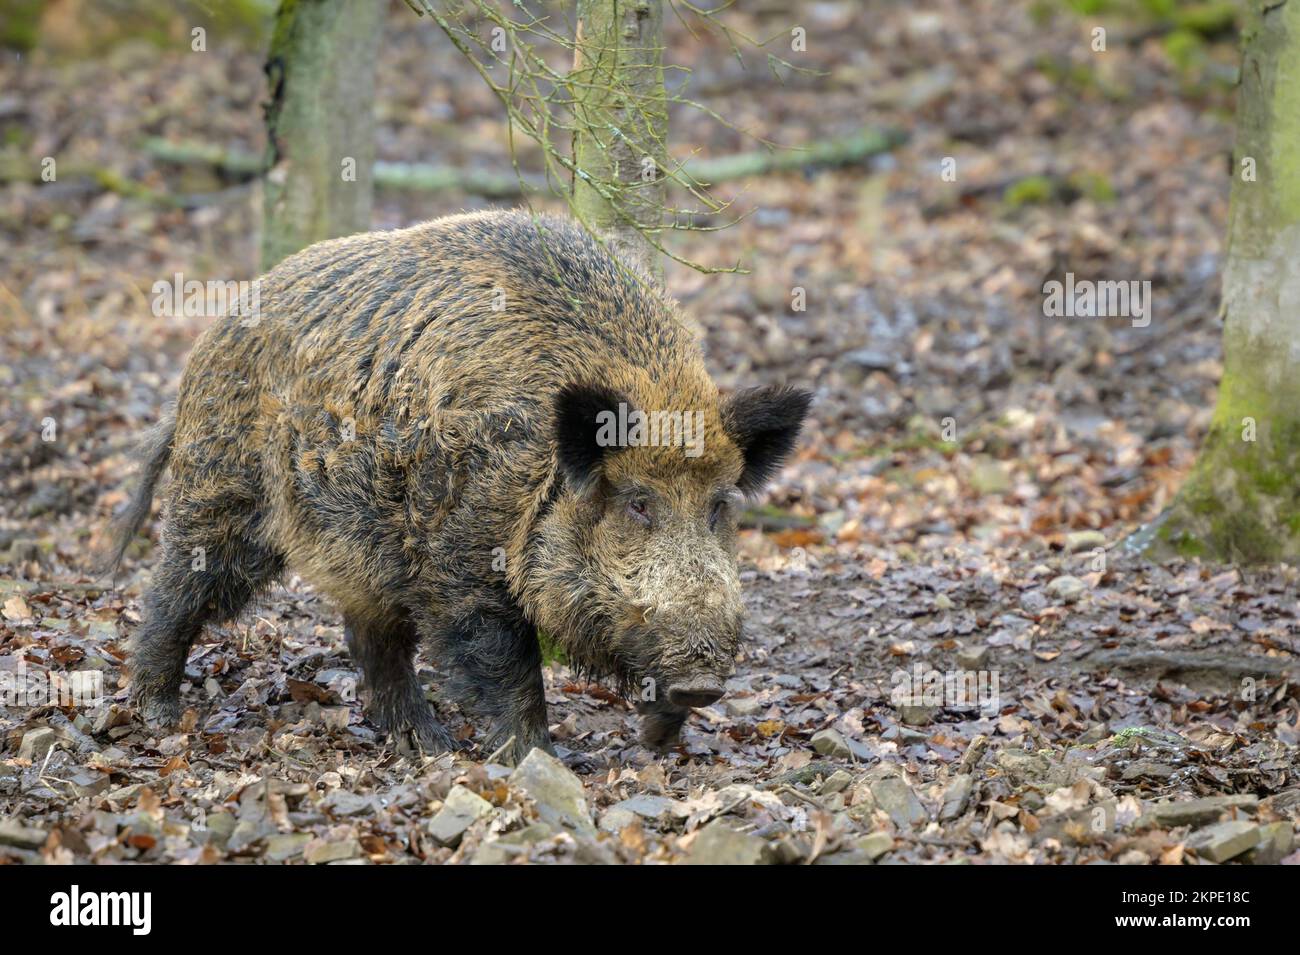 Wild Boar (Sus scrofa) foraging in forest, Germany. Stock Photo